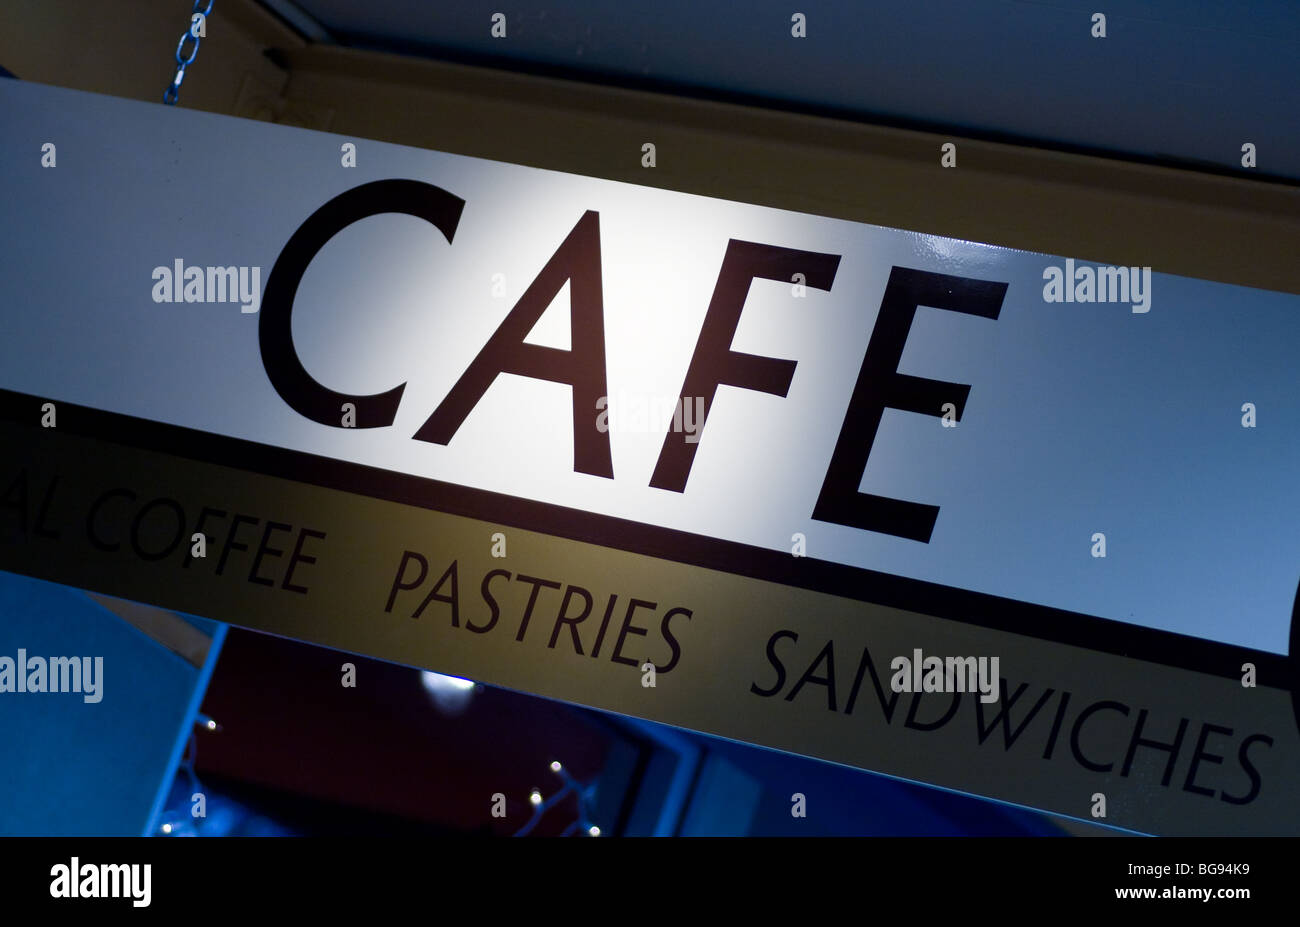 Cafe Sign Stock Photo